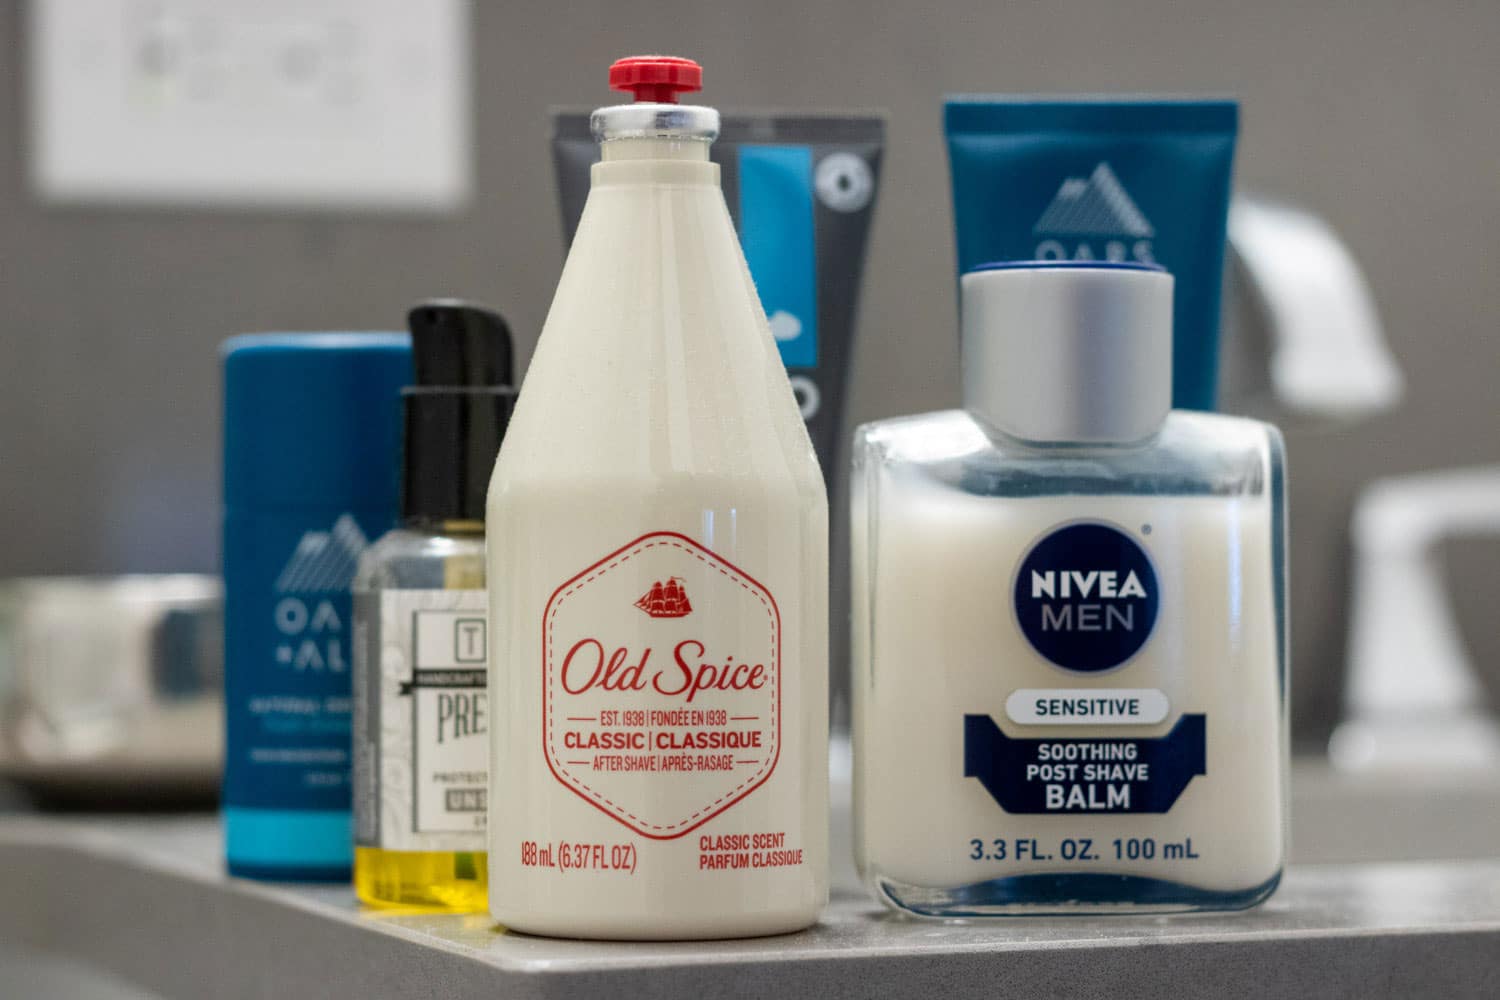 collection of some grooming products to use instead of aftershave